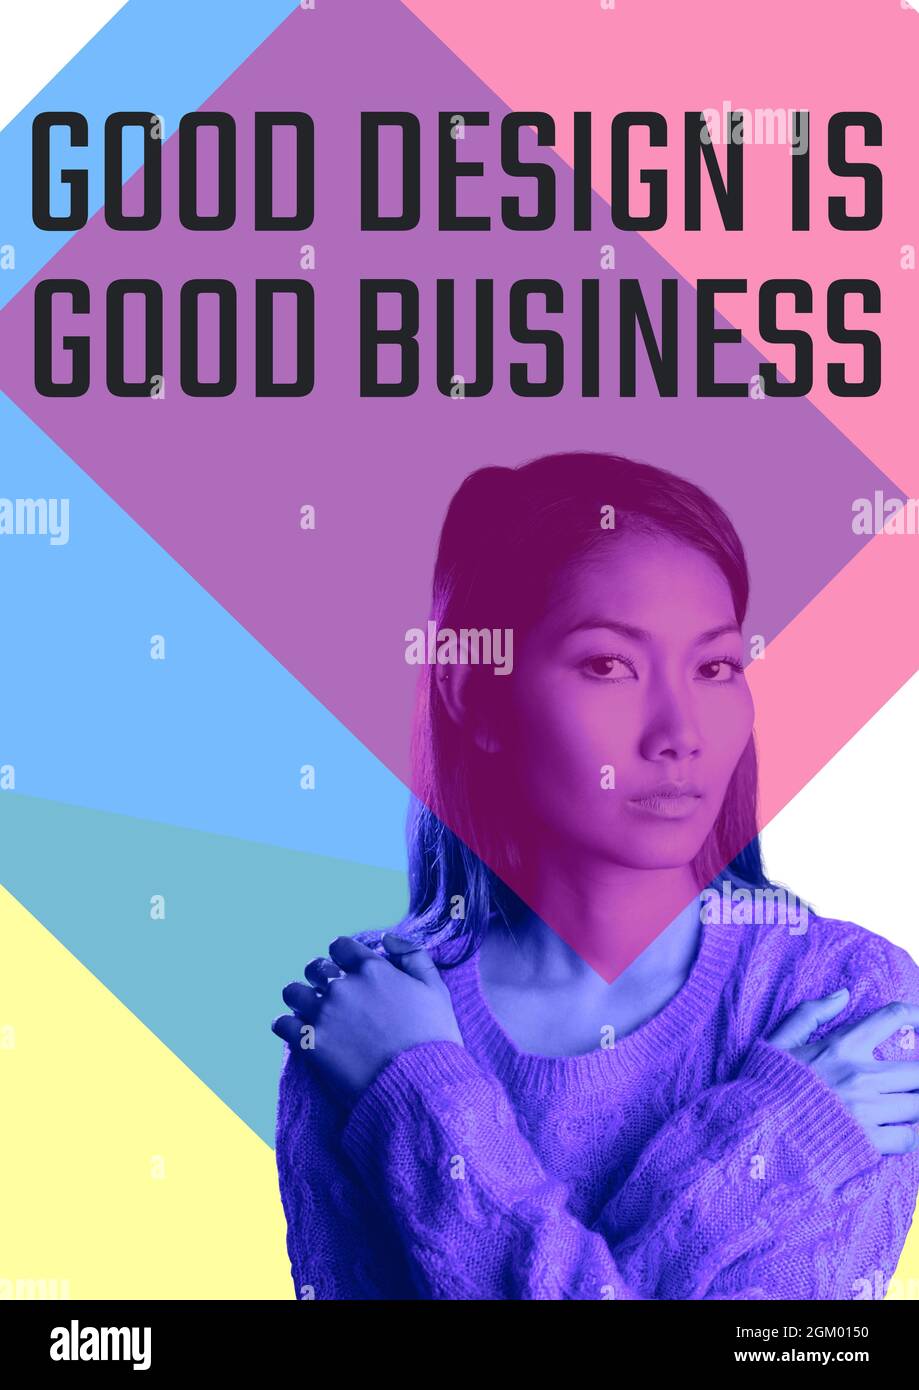 Good design is good business text against portrait of asian woman against colorful background Stock Photo